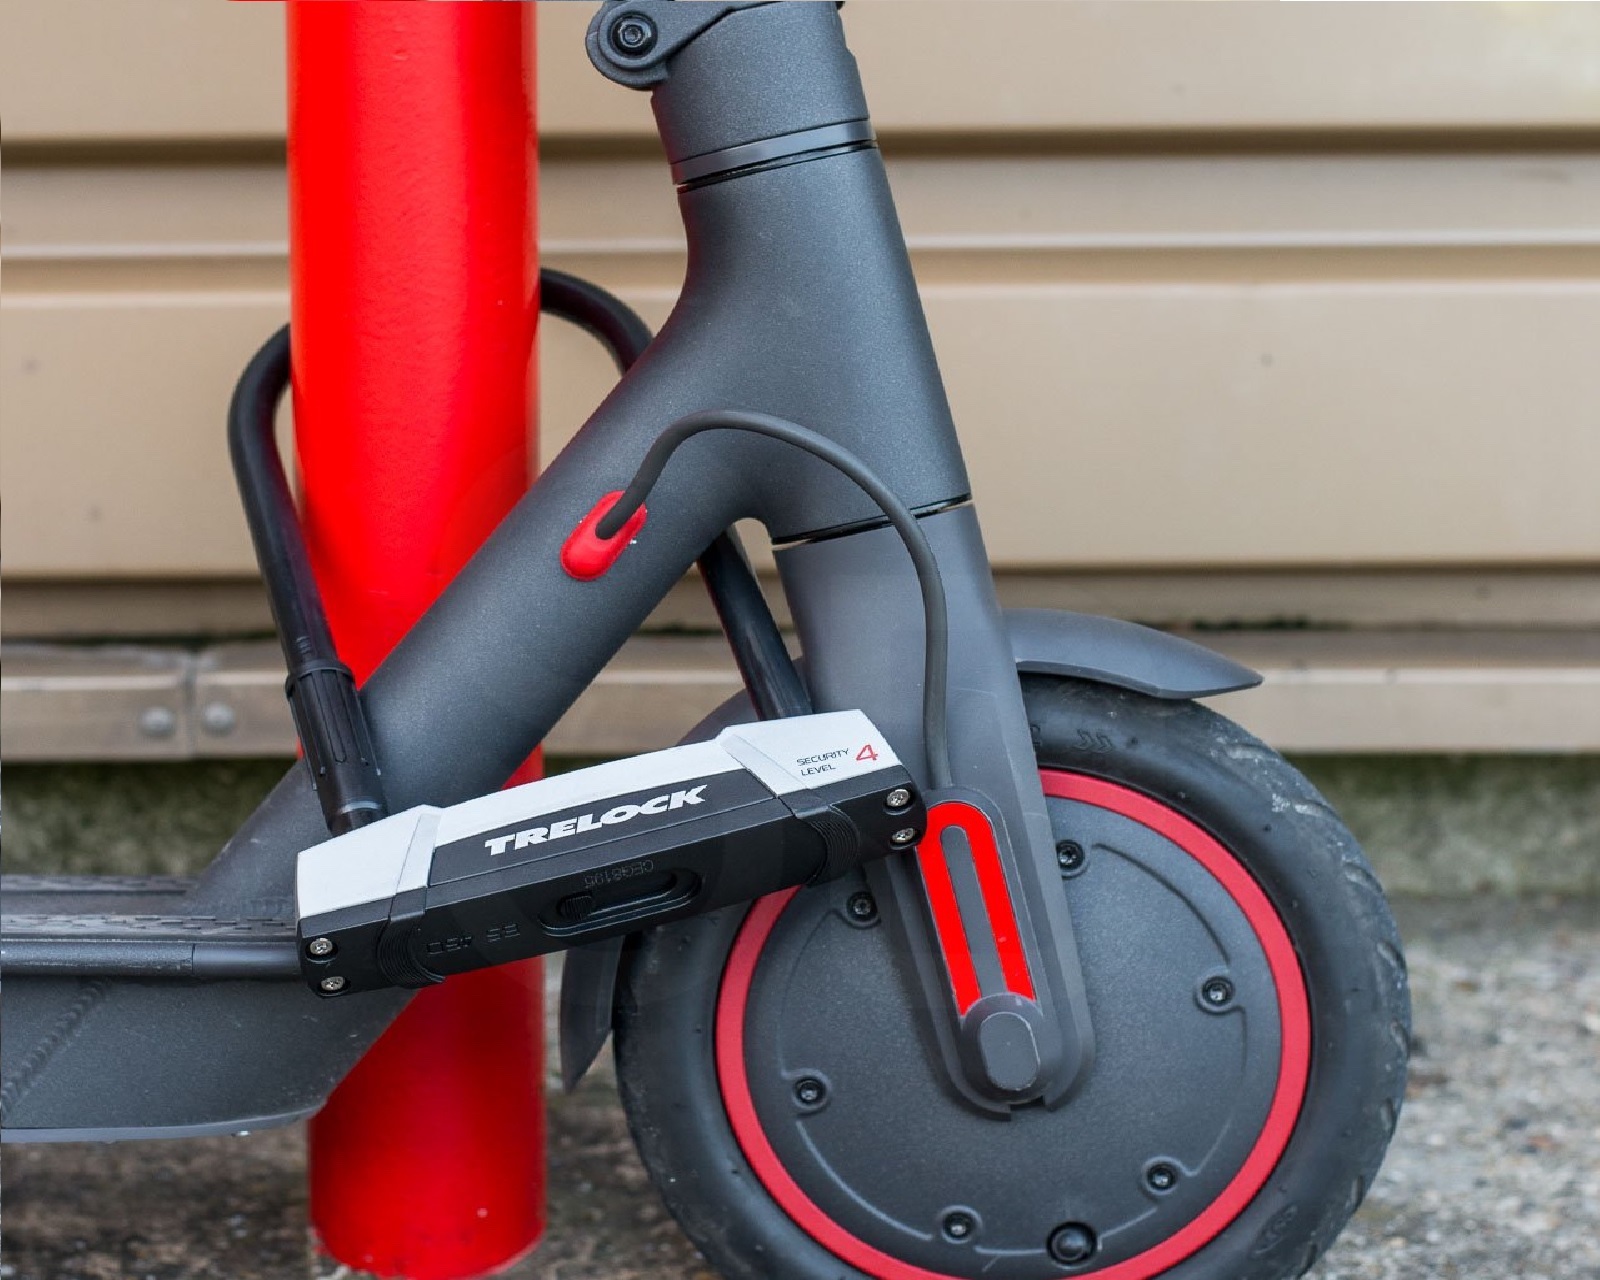 Electric scooter fixed to post with Trelock D-lock in urban environment